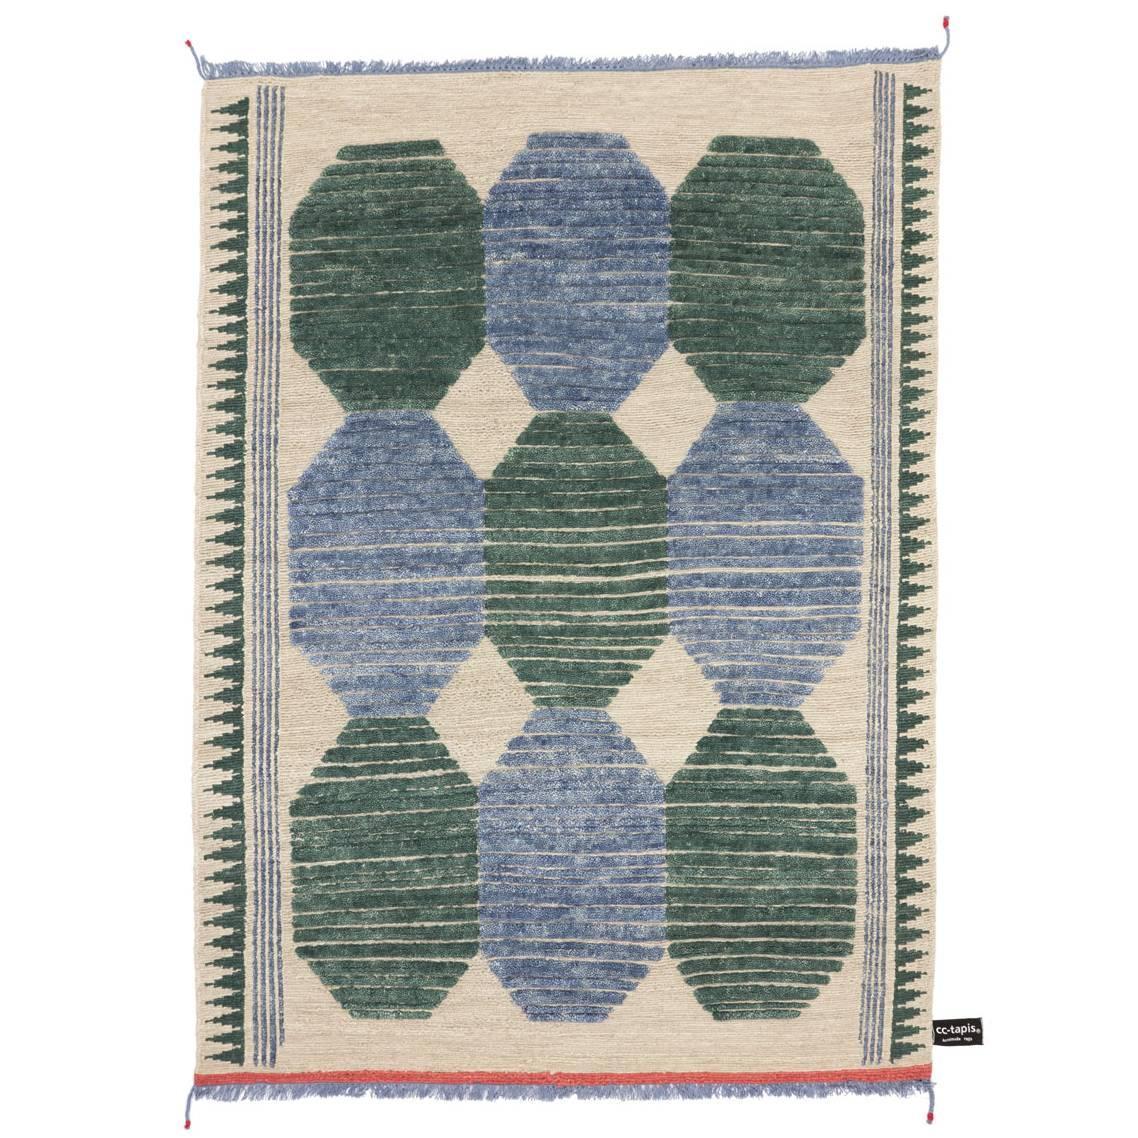 Primitive Weave C Blue/Green #1182 rug Designed by Chiara Andreatti for cc-tapis